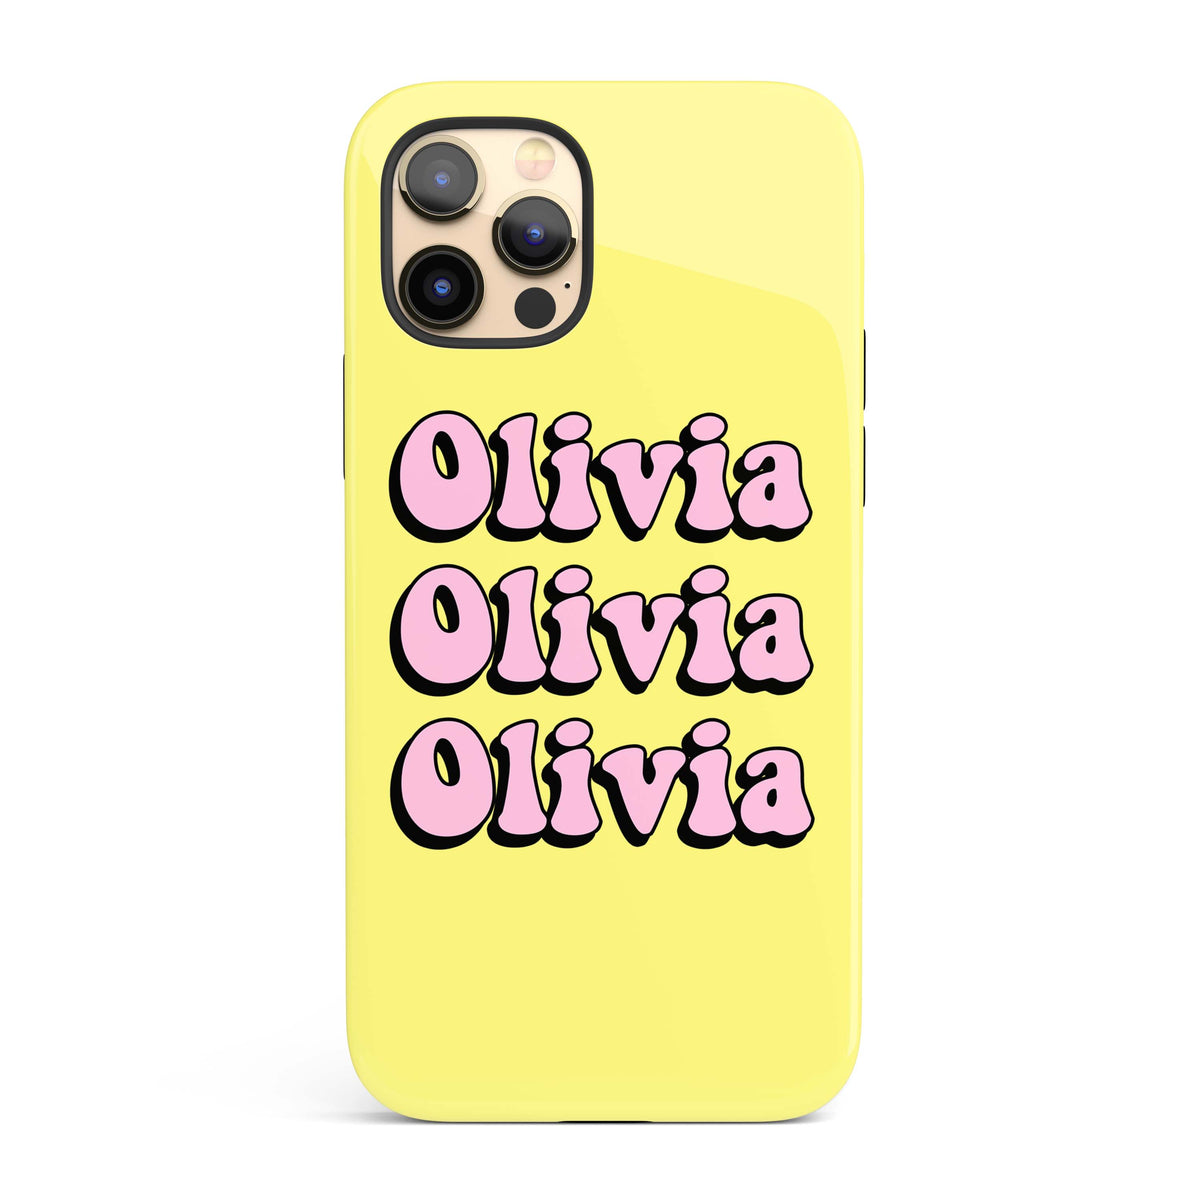 The Personalised Life's A Beach Case